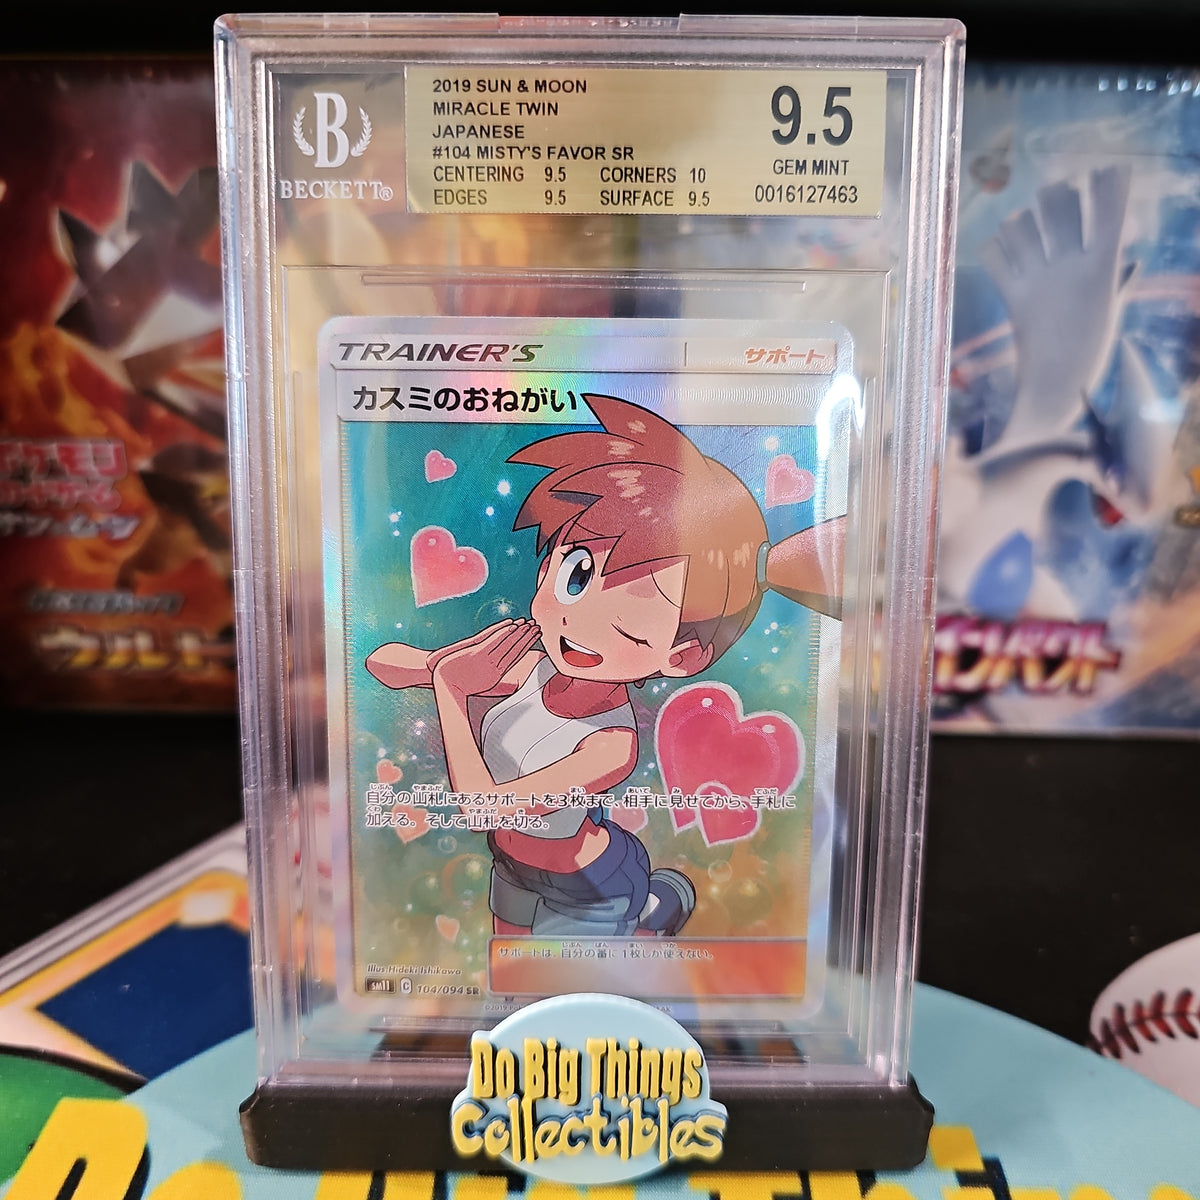 Japanese Miracle Twin Misty's Favor SR BGS 9.5